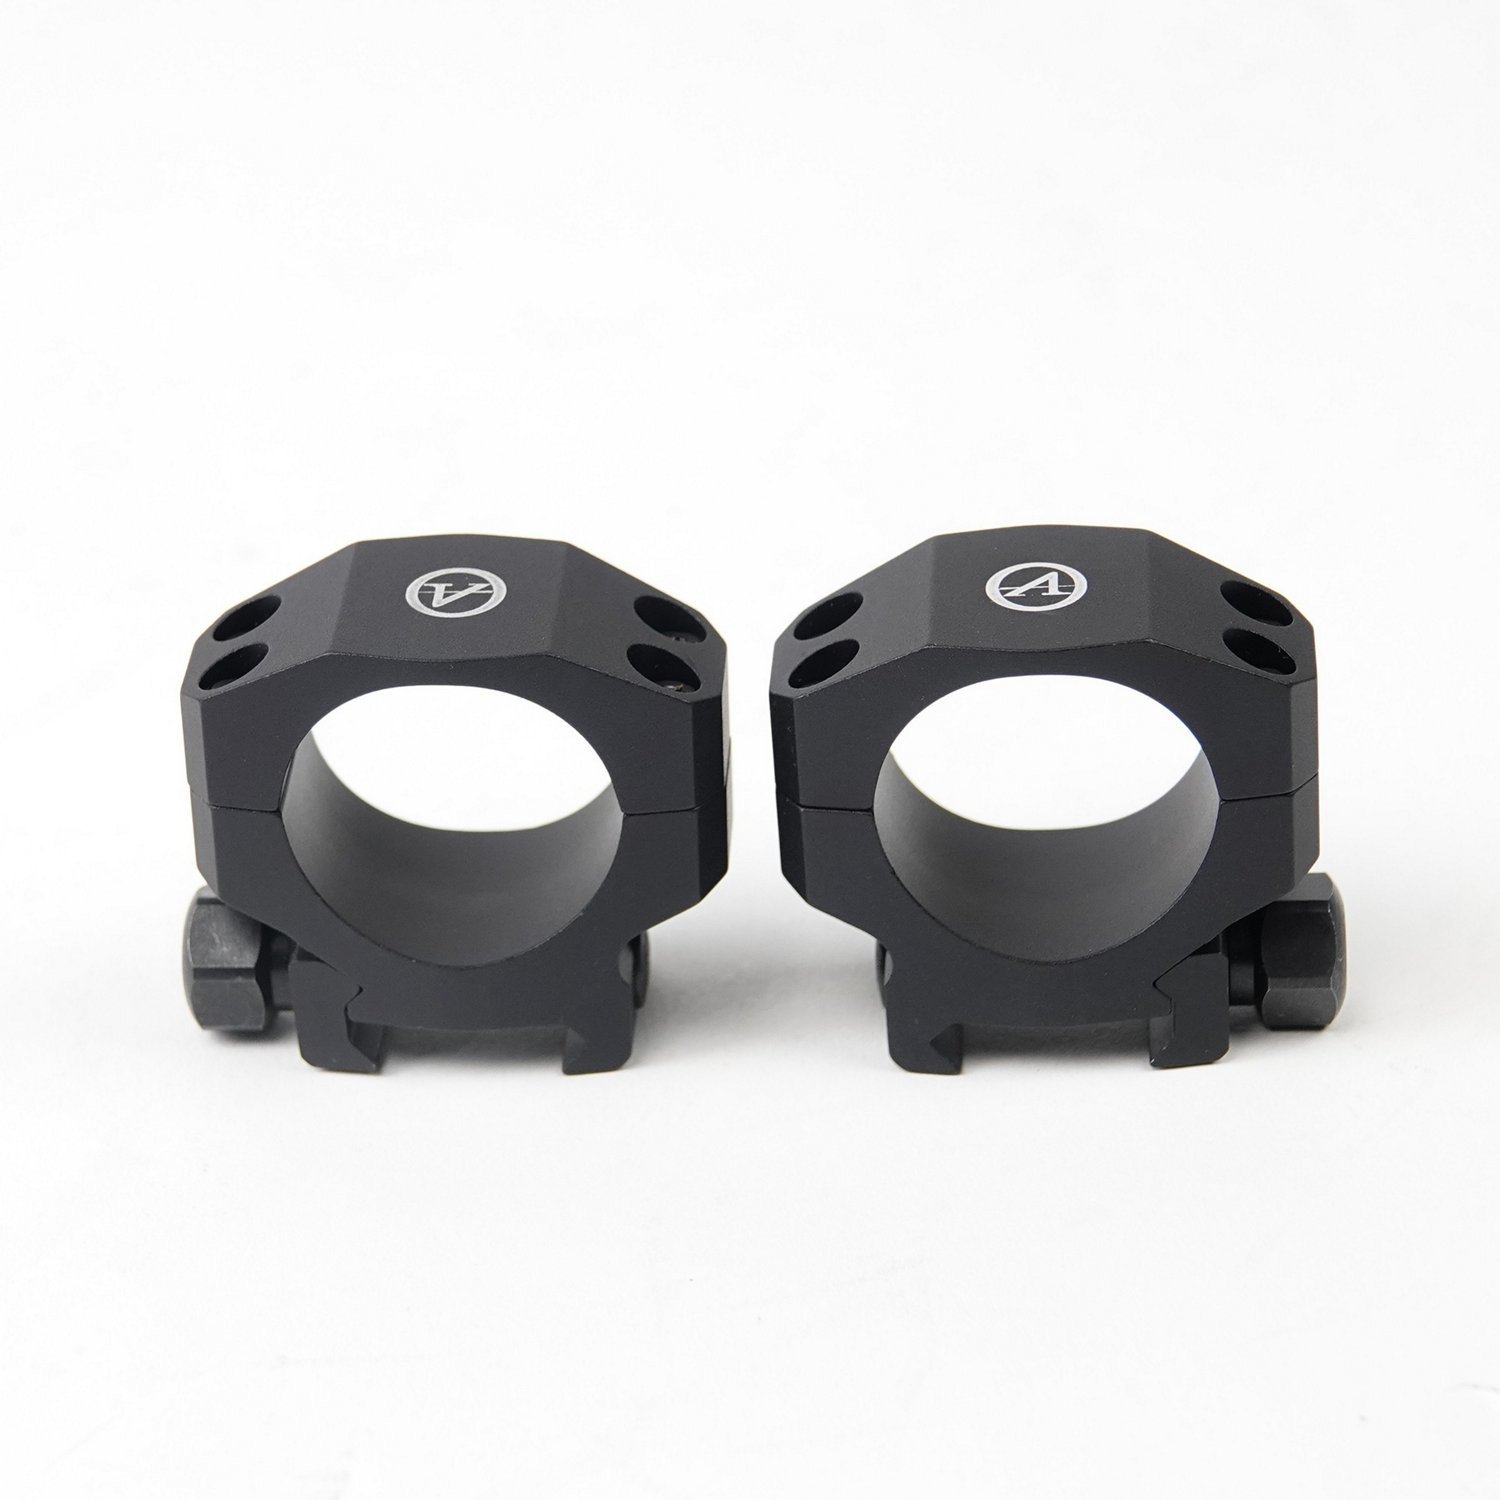 Athlon Optics Precision 30 mm Low Height Scope Rings 2-Pack | Academy